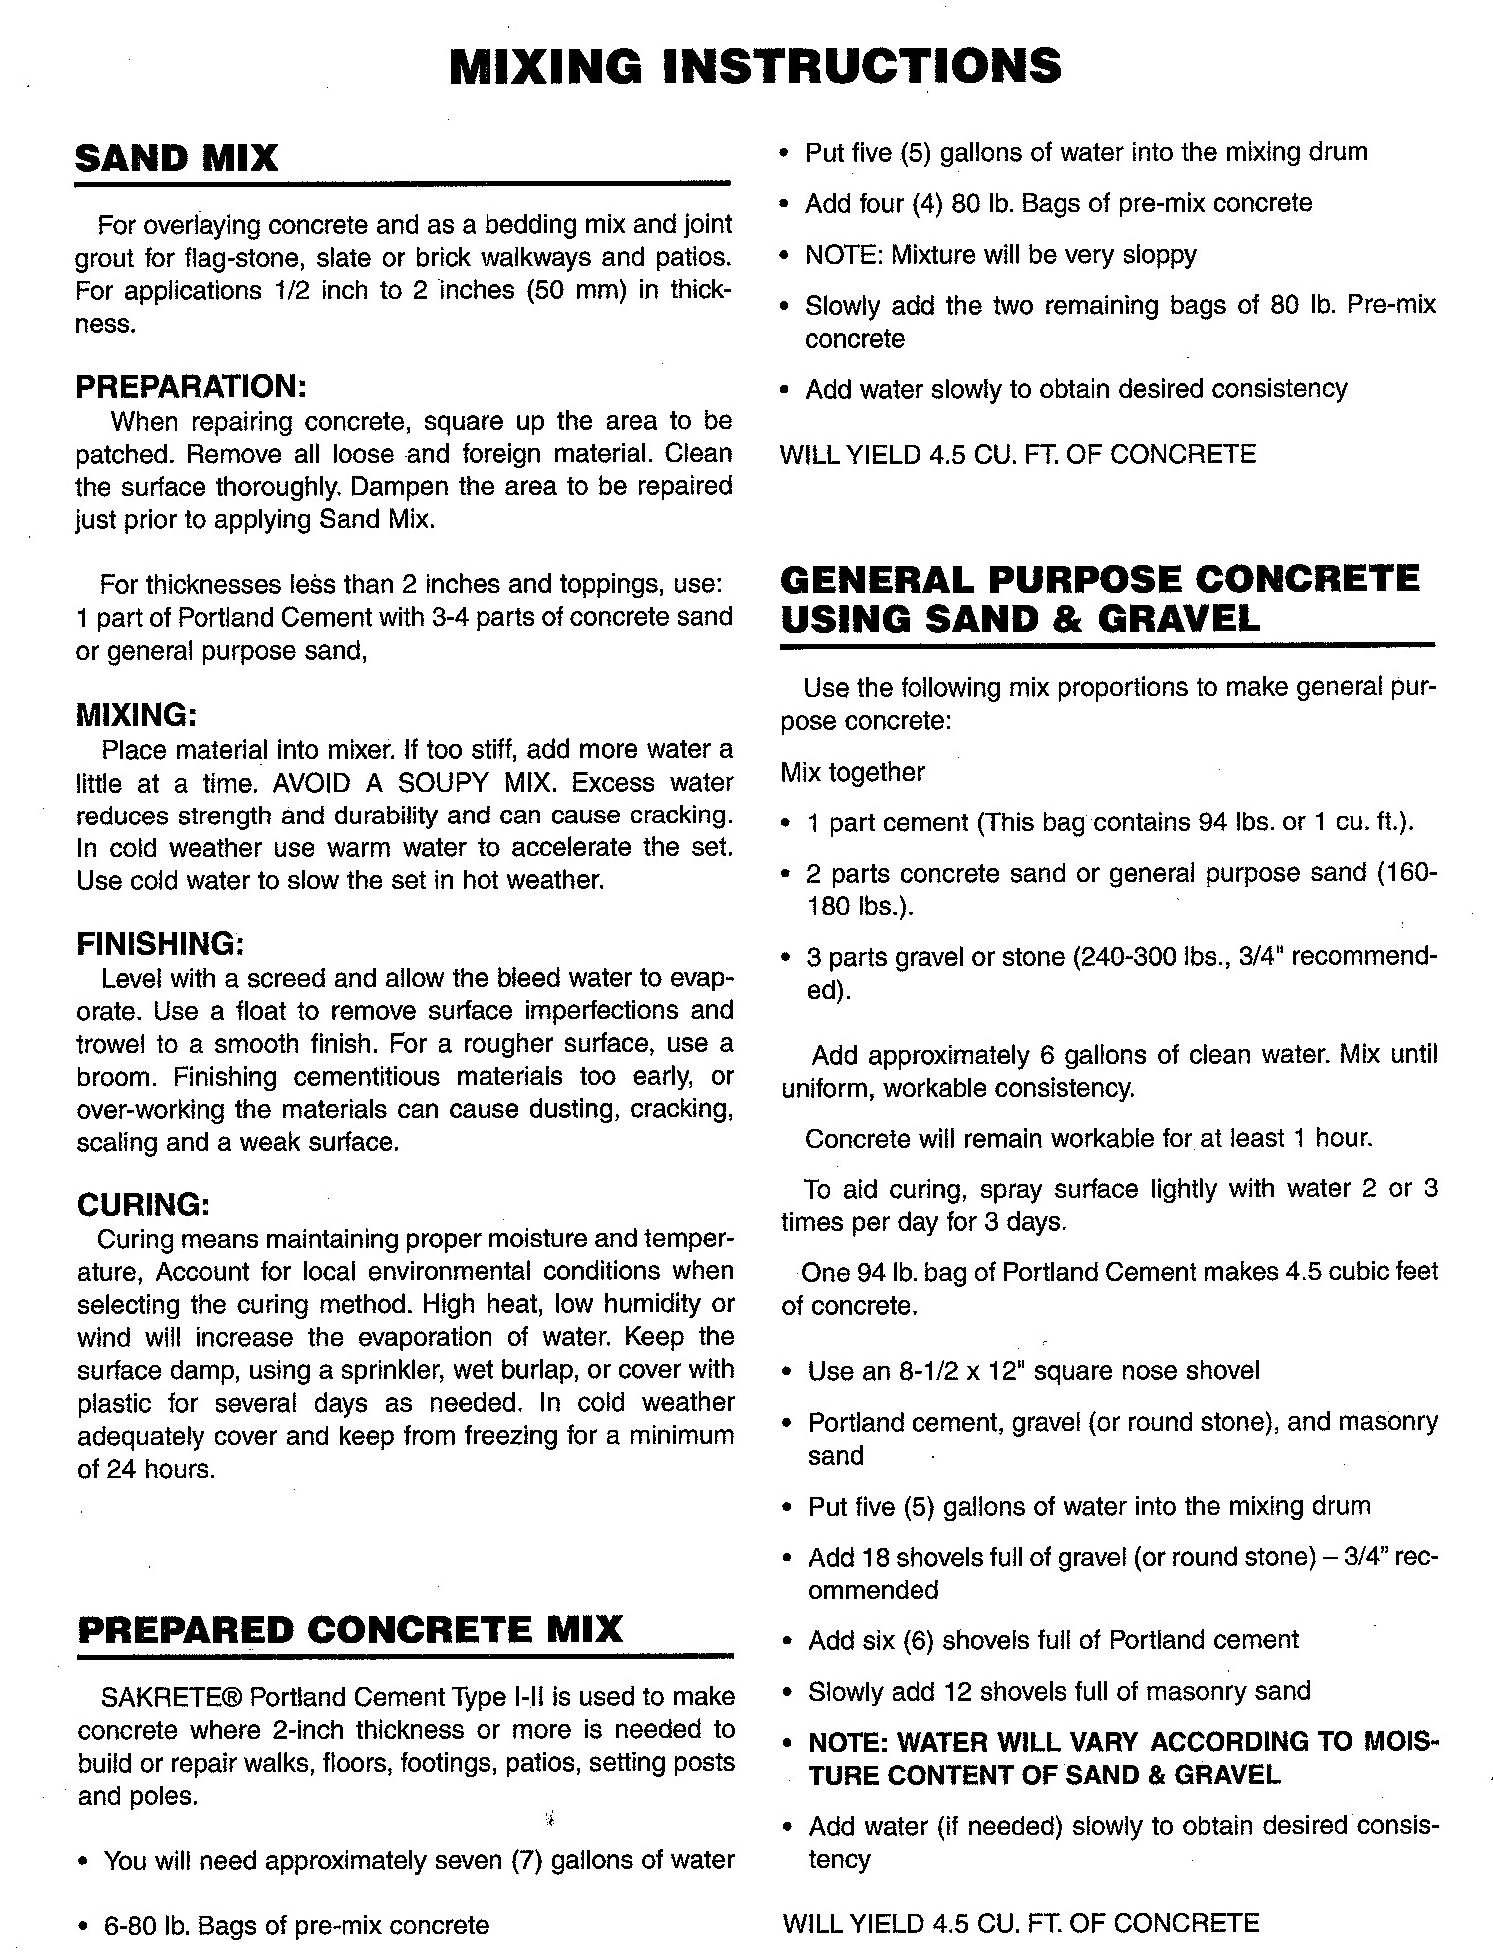 SS-590 Mixing Instructions